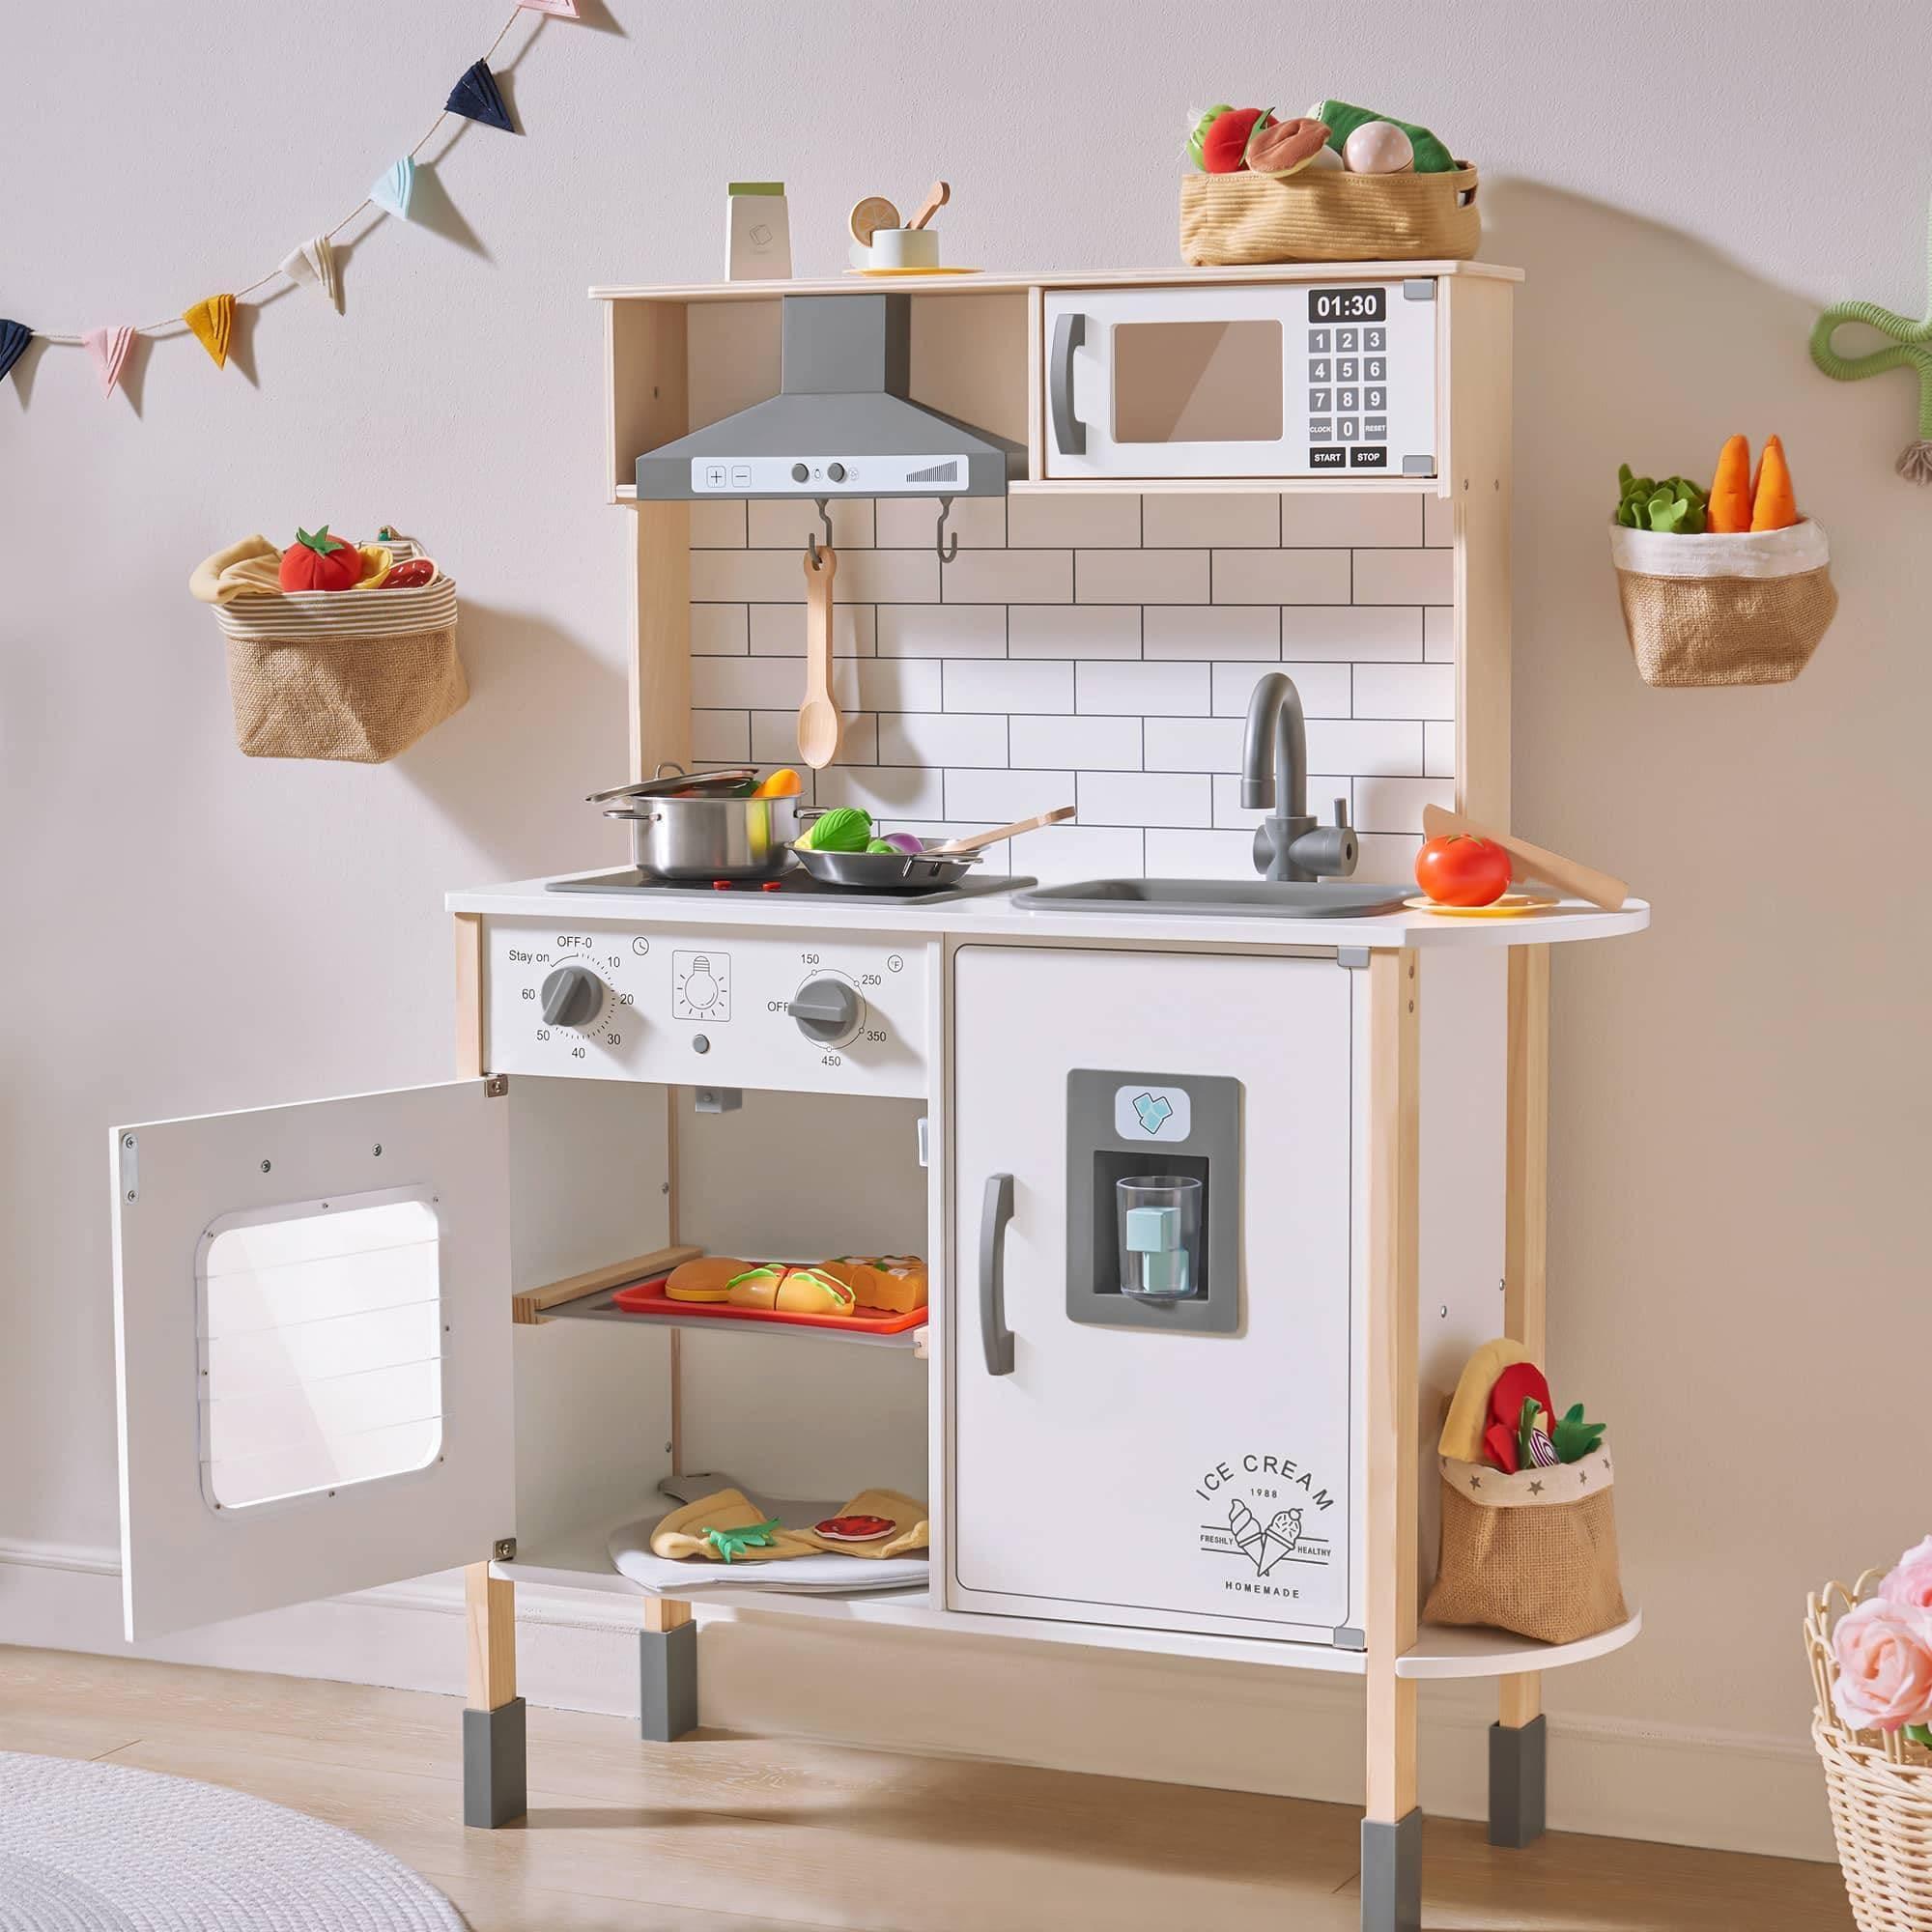 https://www.tinylandus.com/cdn/shop/files/tiny-land-r-play-kitchen-with-18-pcs-toy-food-and-cookware-accessories-tiny-land-4_1739dc42-1cba-4355-99c5-b08bd490822f.jpg?v=1690784443